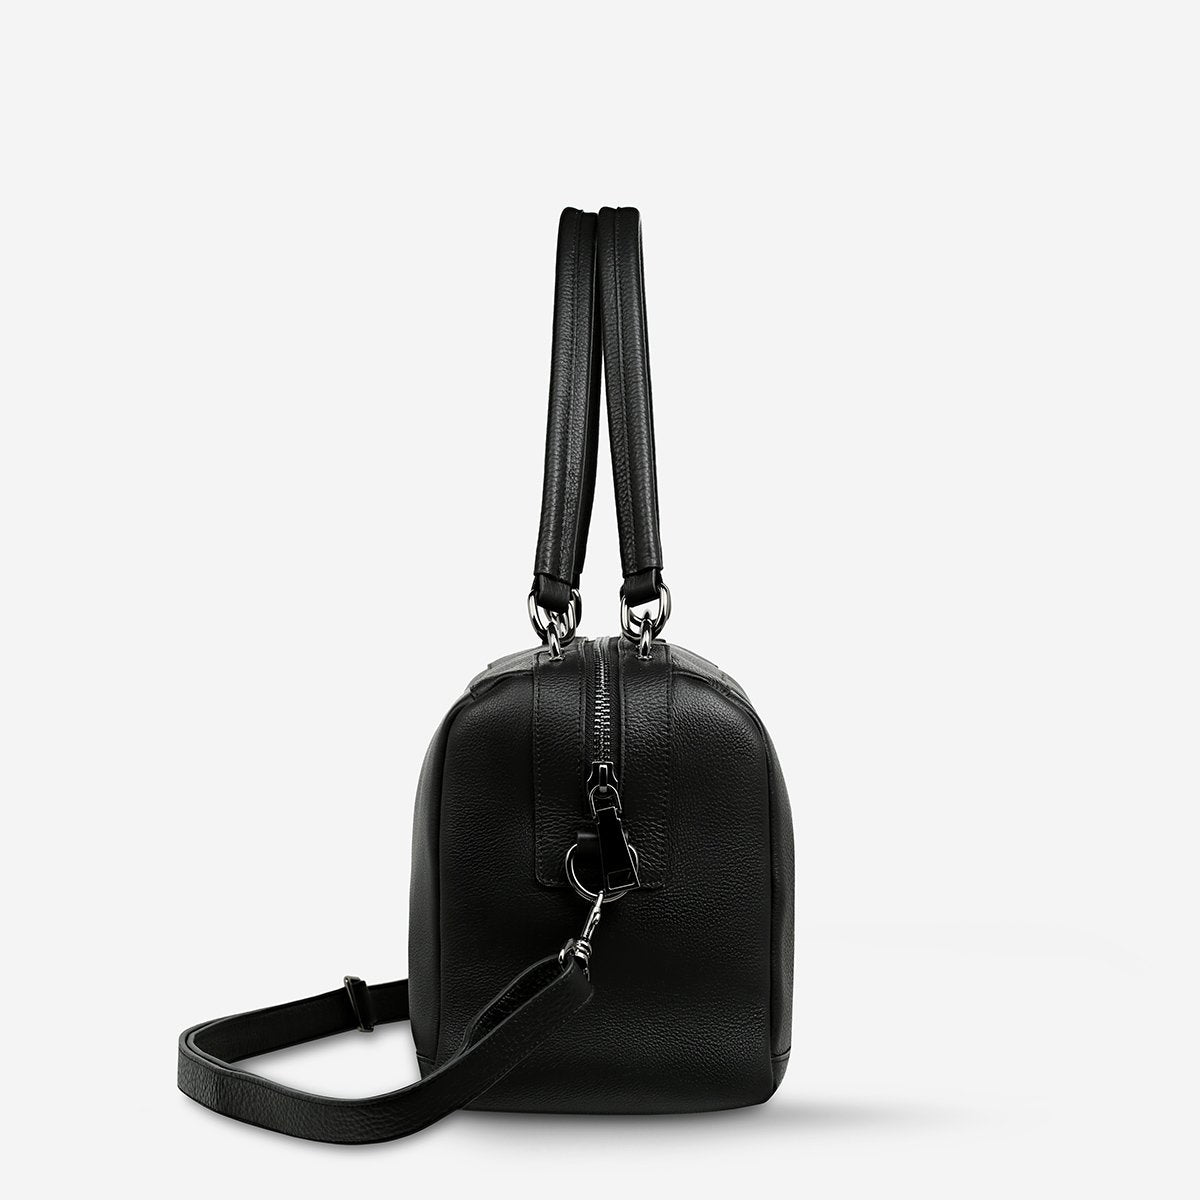 Status Anxiety Don't Ask Bag in Black Side View